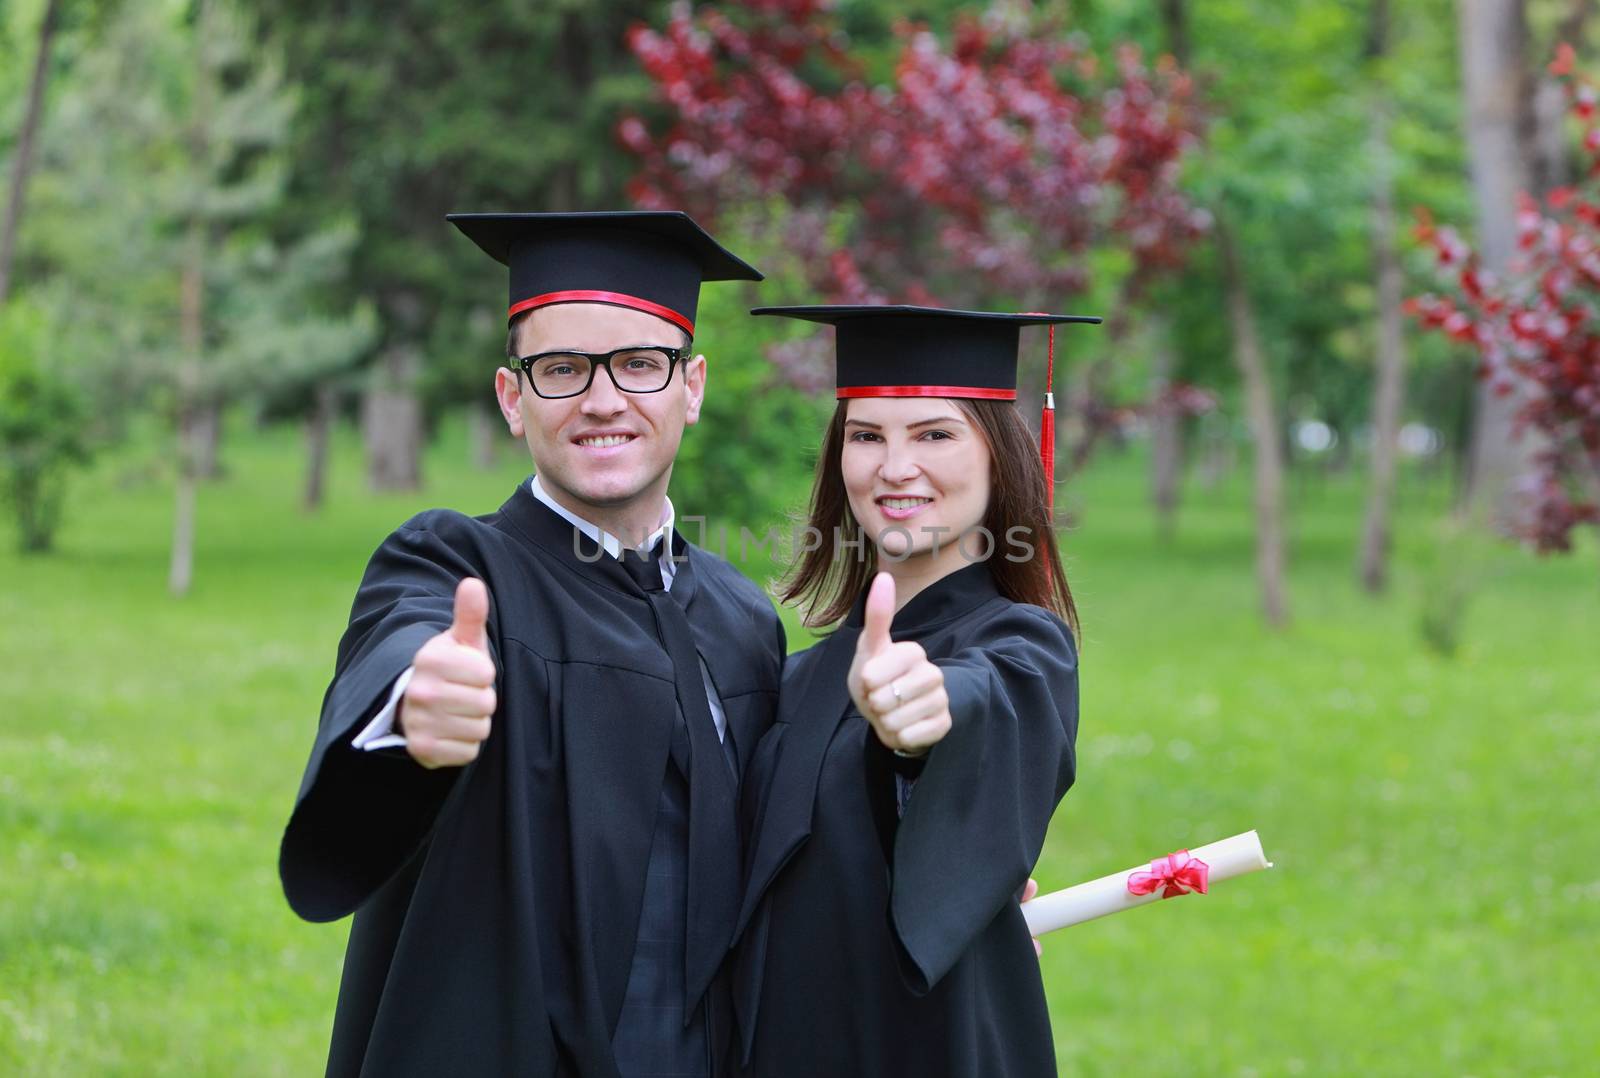 Portrait of a happy couple of students in the graduation day, posing with thumbs up in a park.